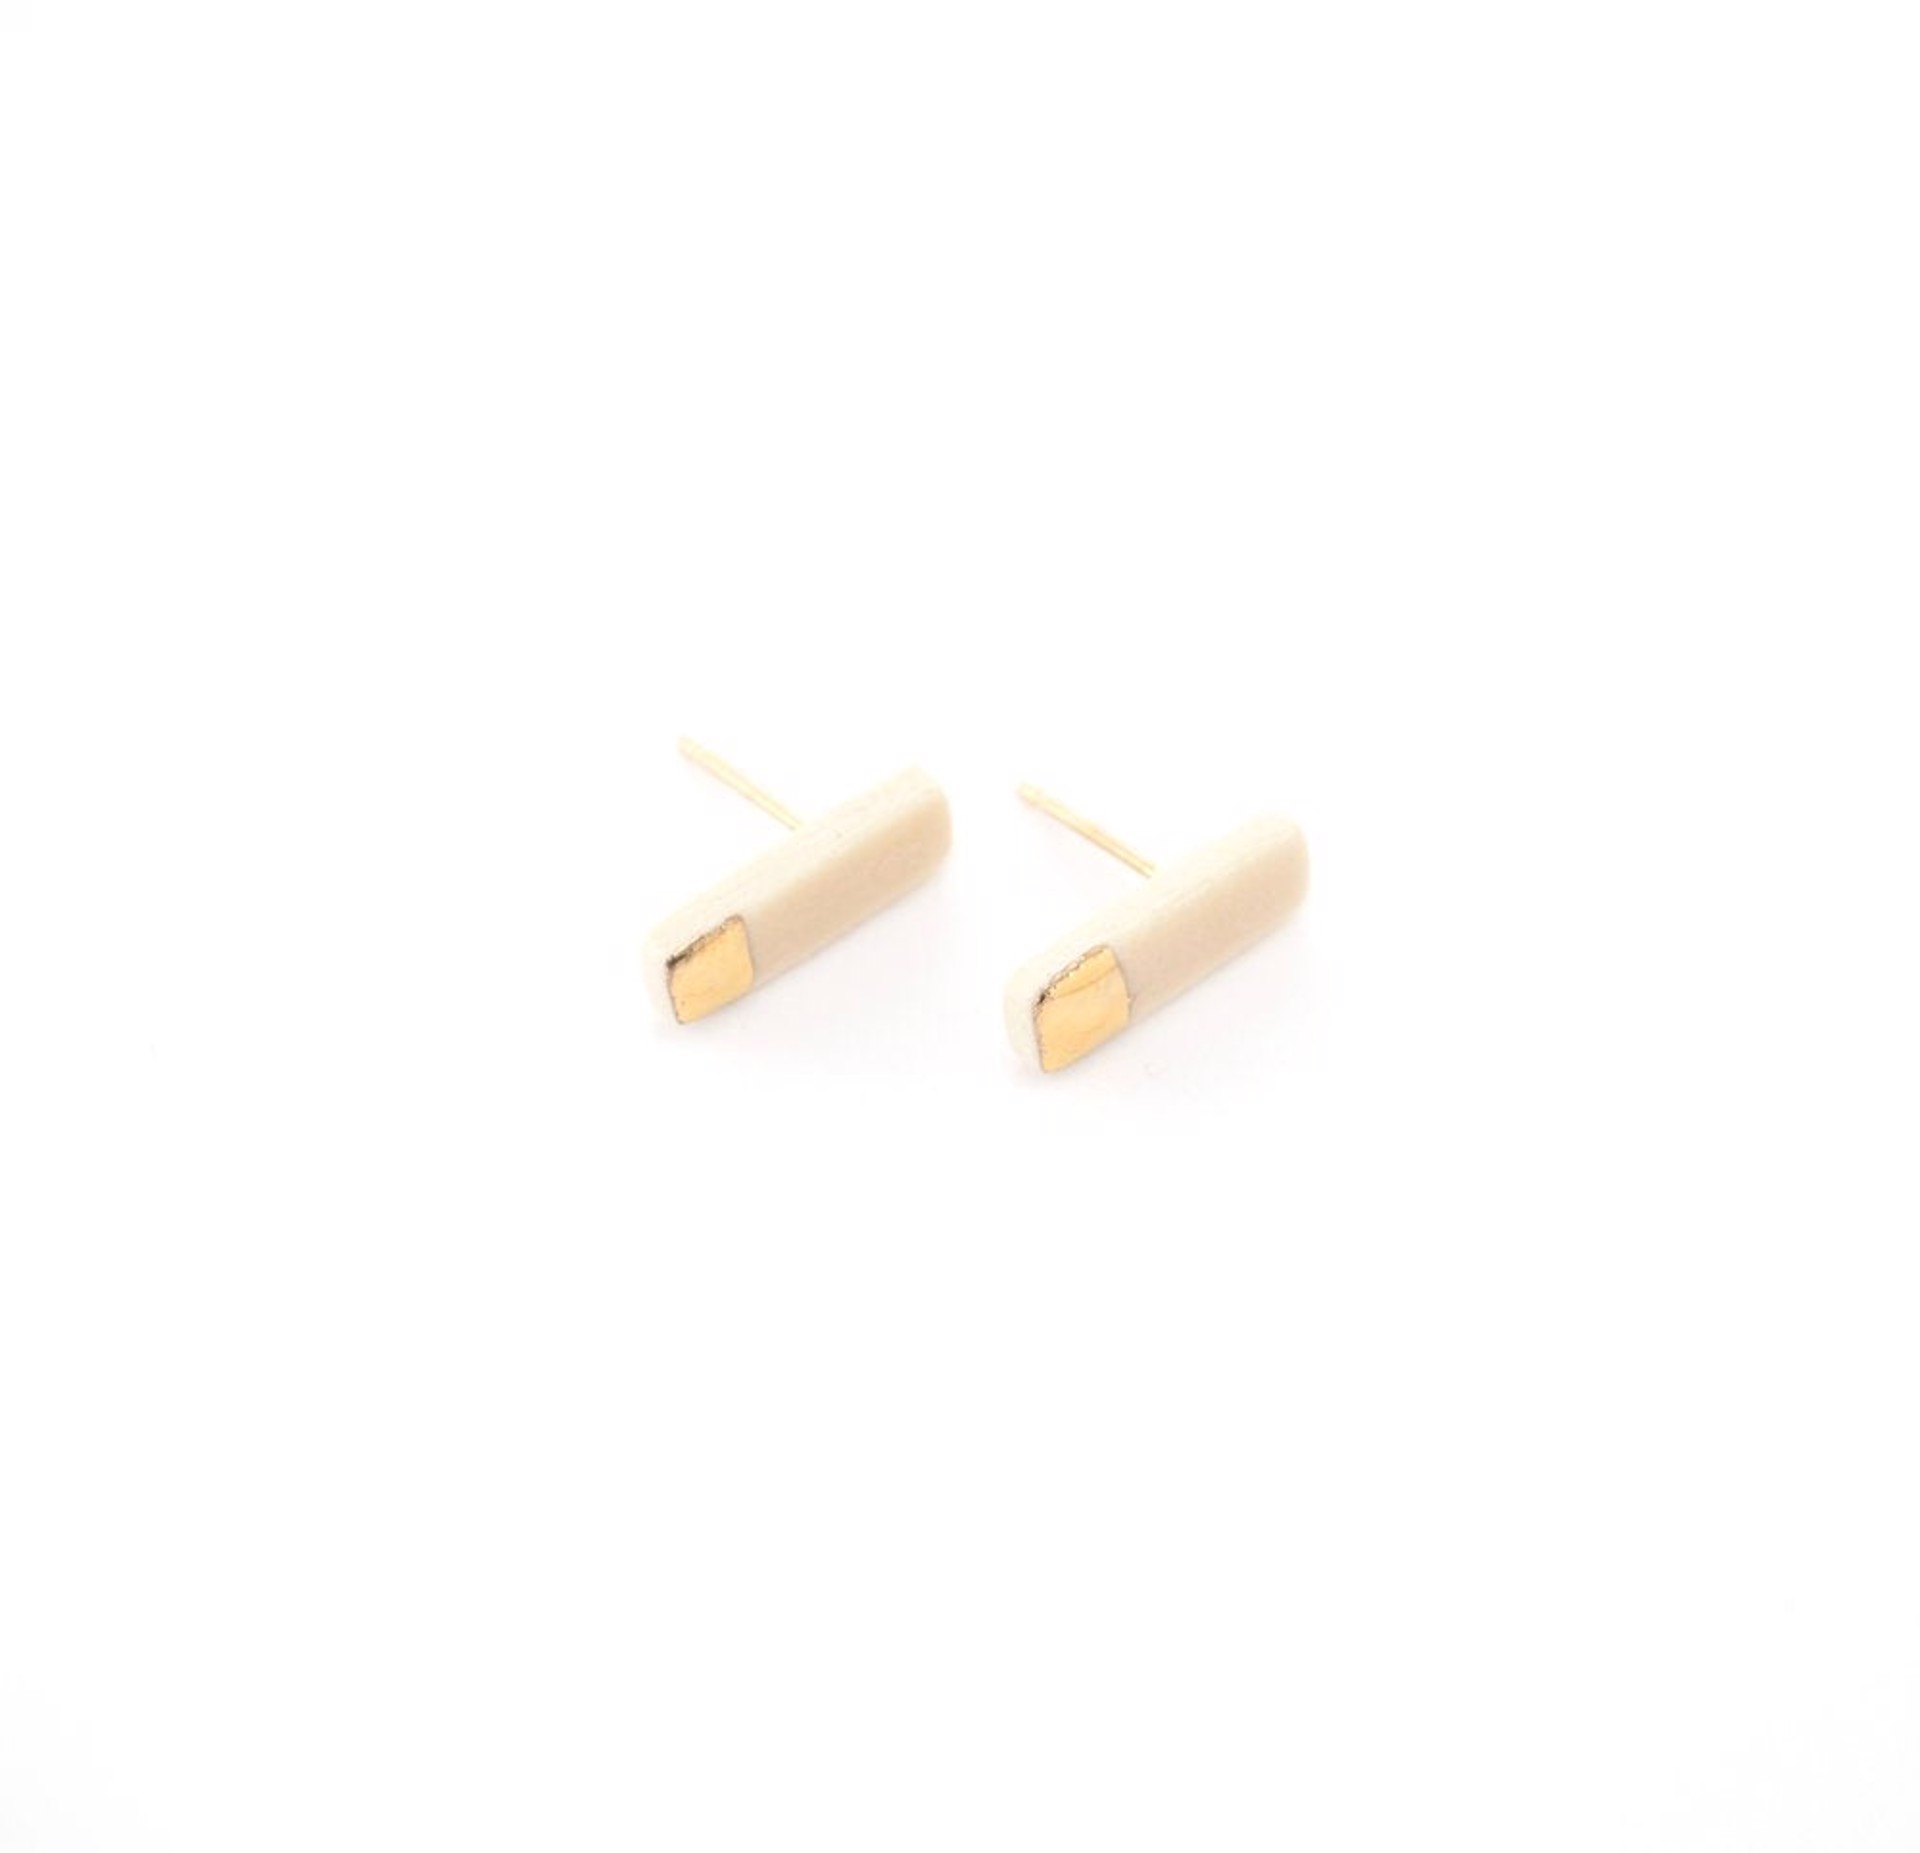 Tiny Reed Studs - White/Gold by Zoe Comings